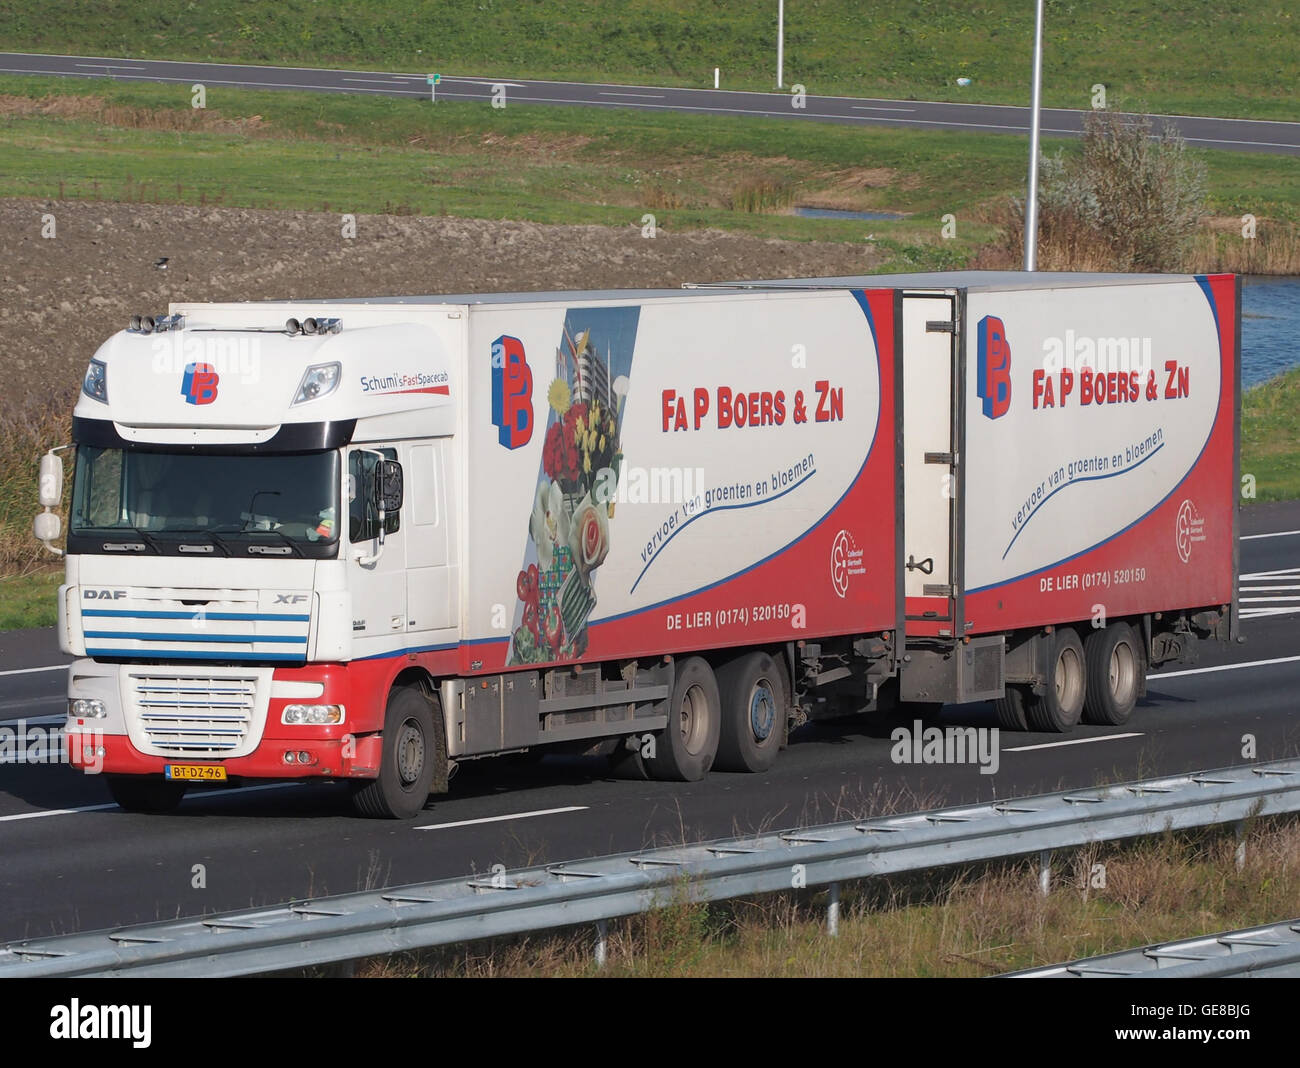 DAF XF, Fa P Broers & Zn Banque D'Images